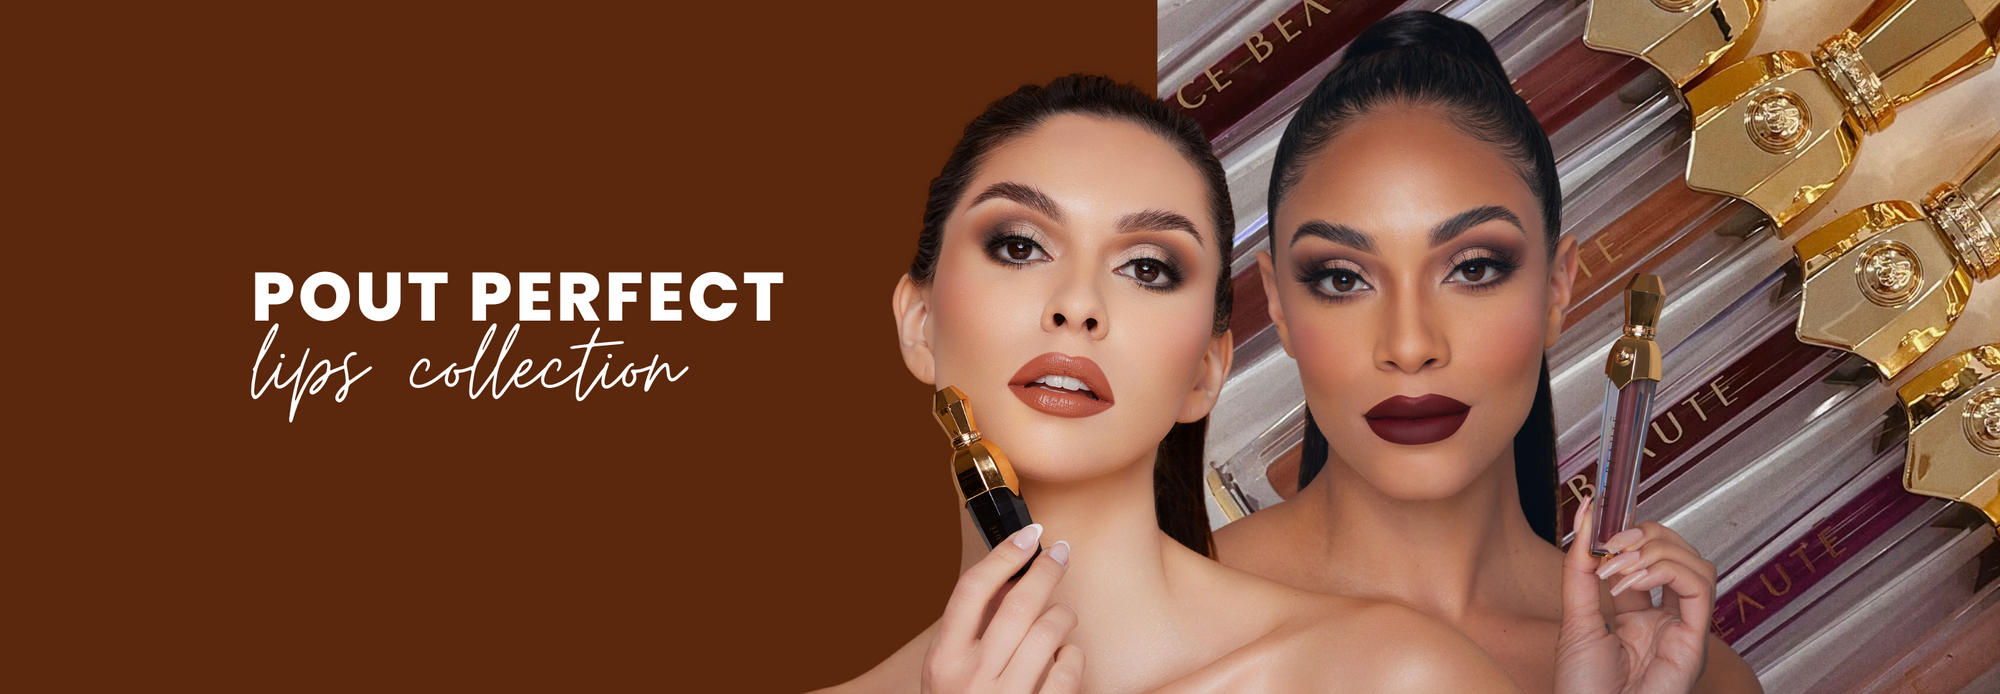 Pout Perfect Lips Collection